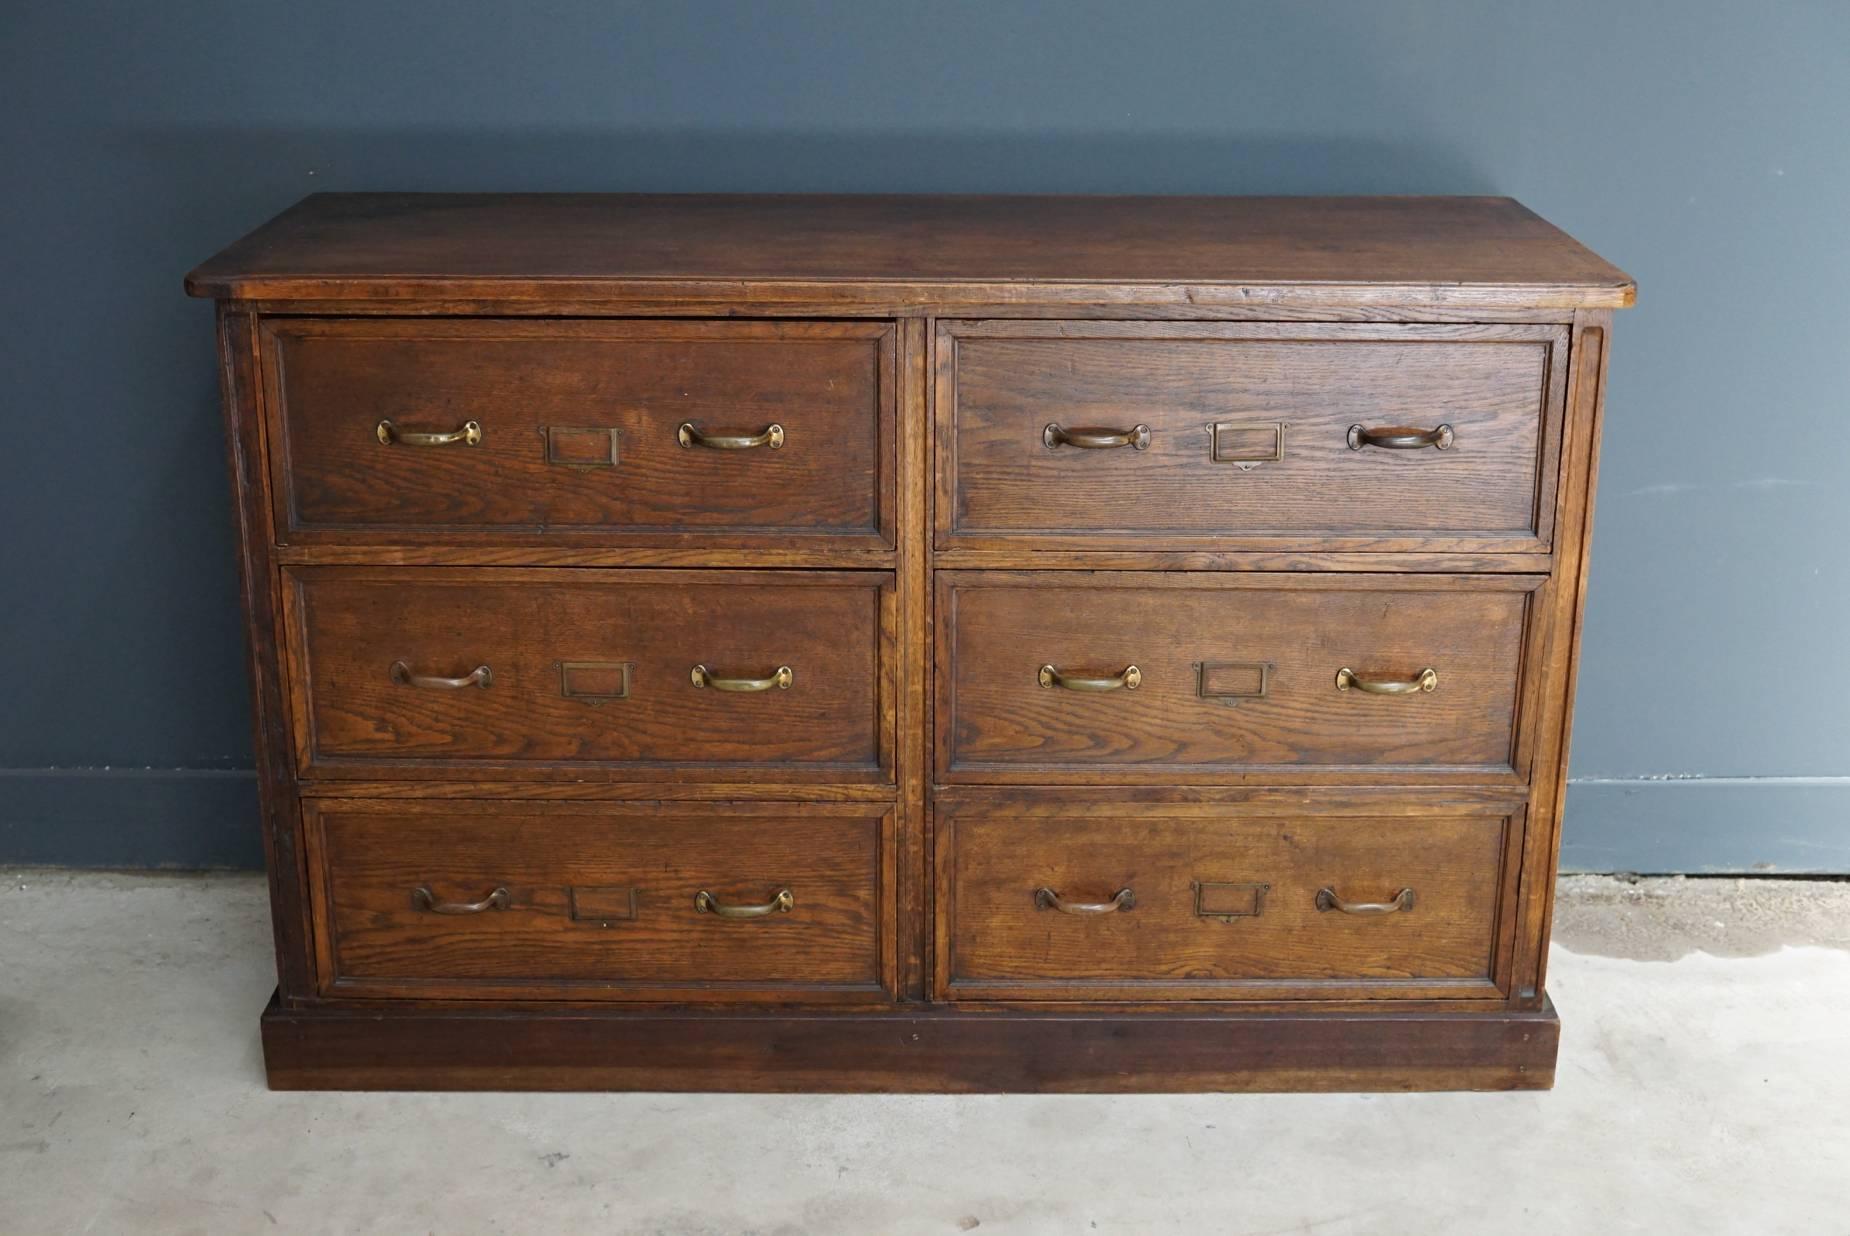 This apothecary bank of drawers was designed, circa 1900s in the United Kingdom. The piece is made from oak and features 6 drawers with brass hardware.